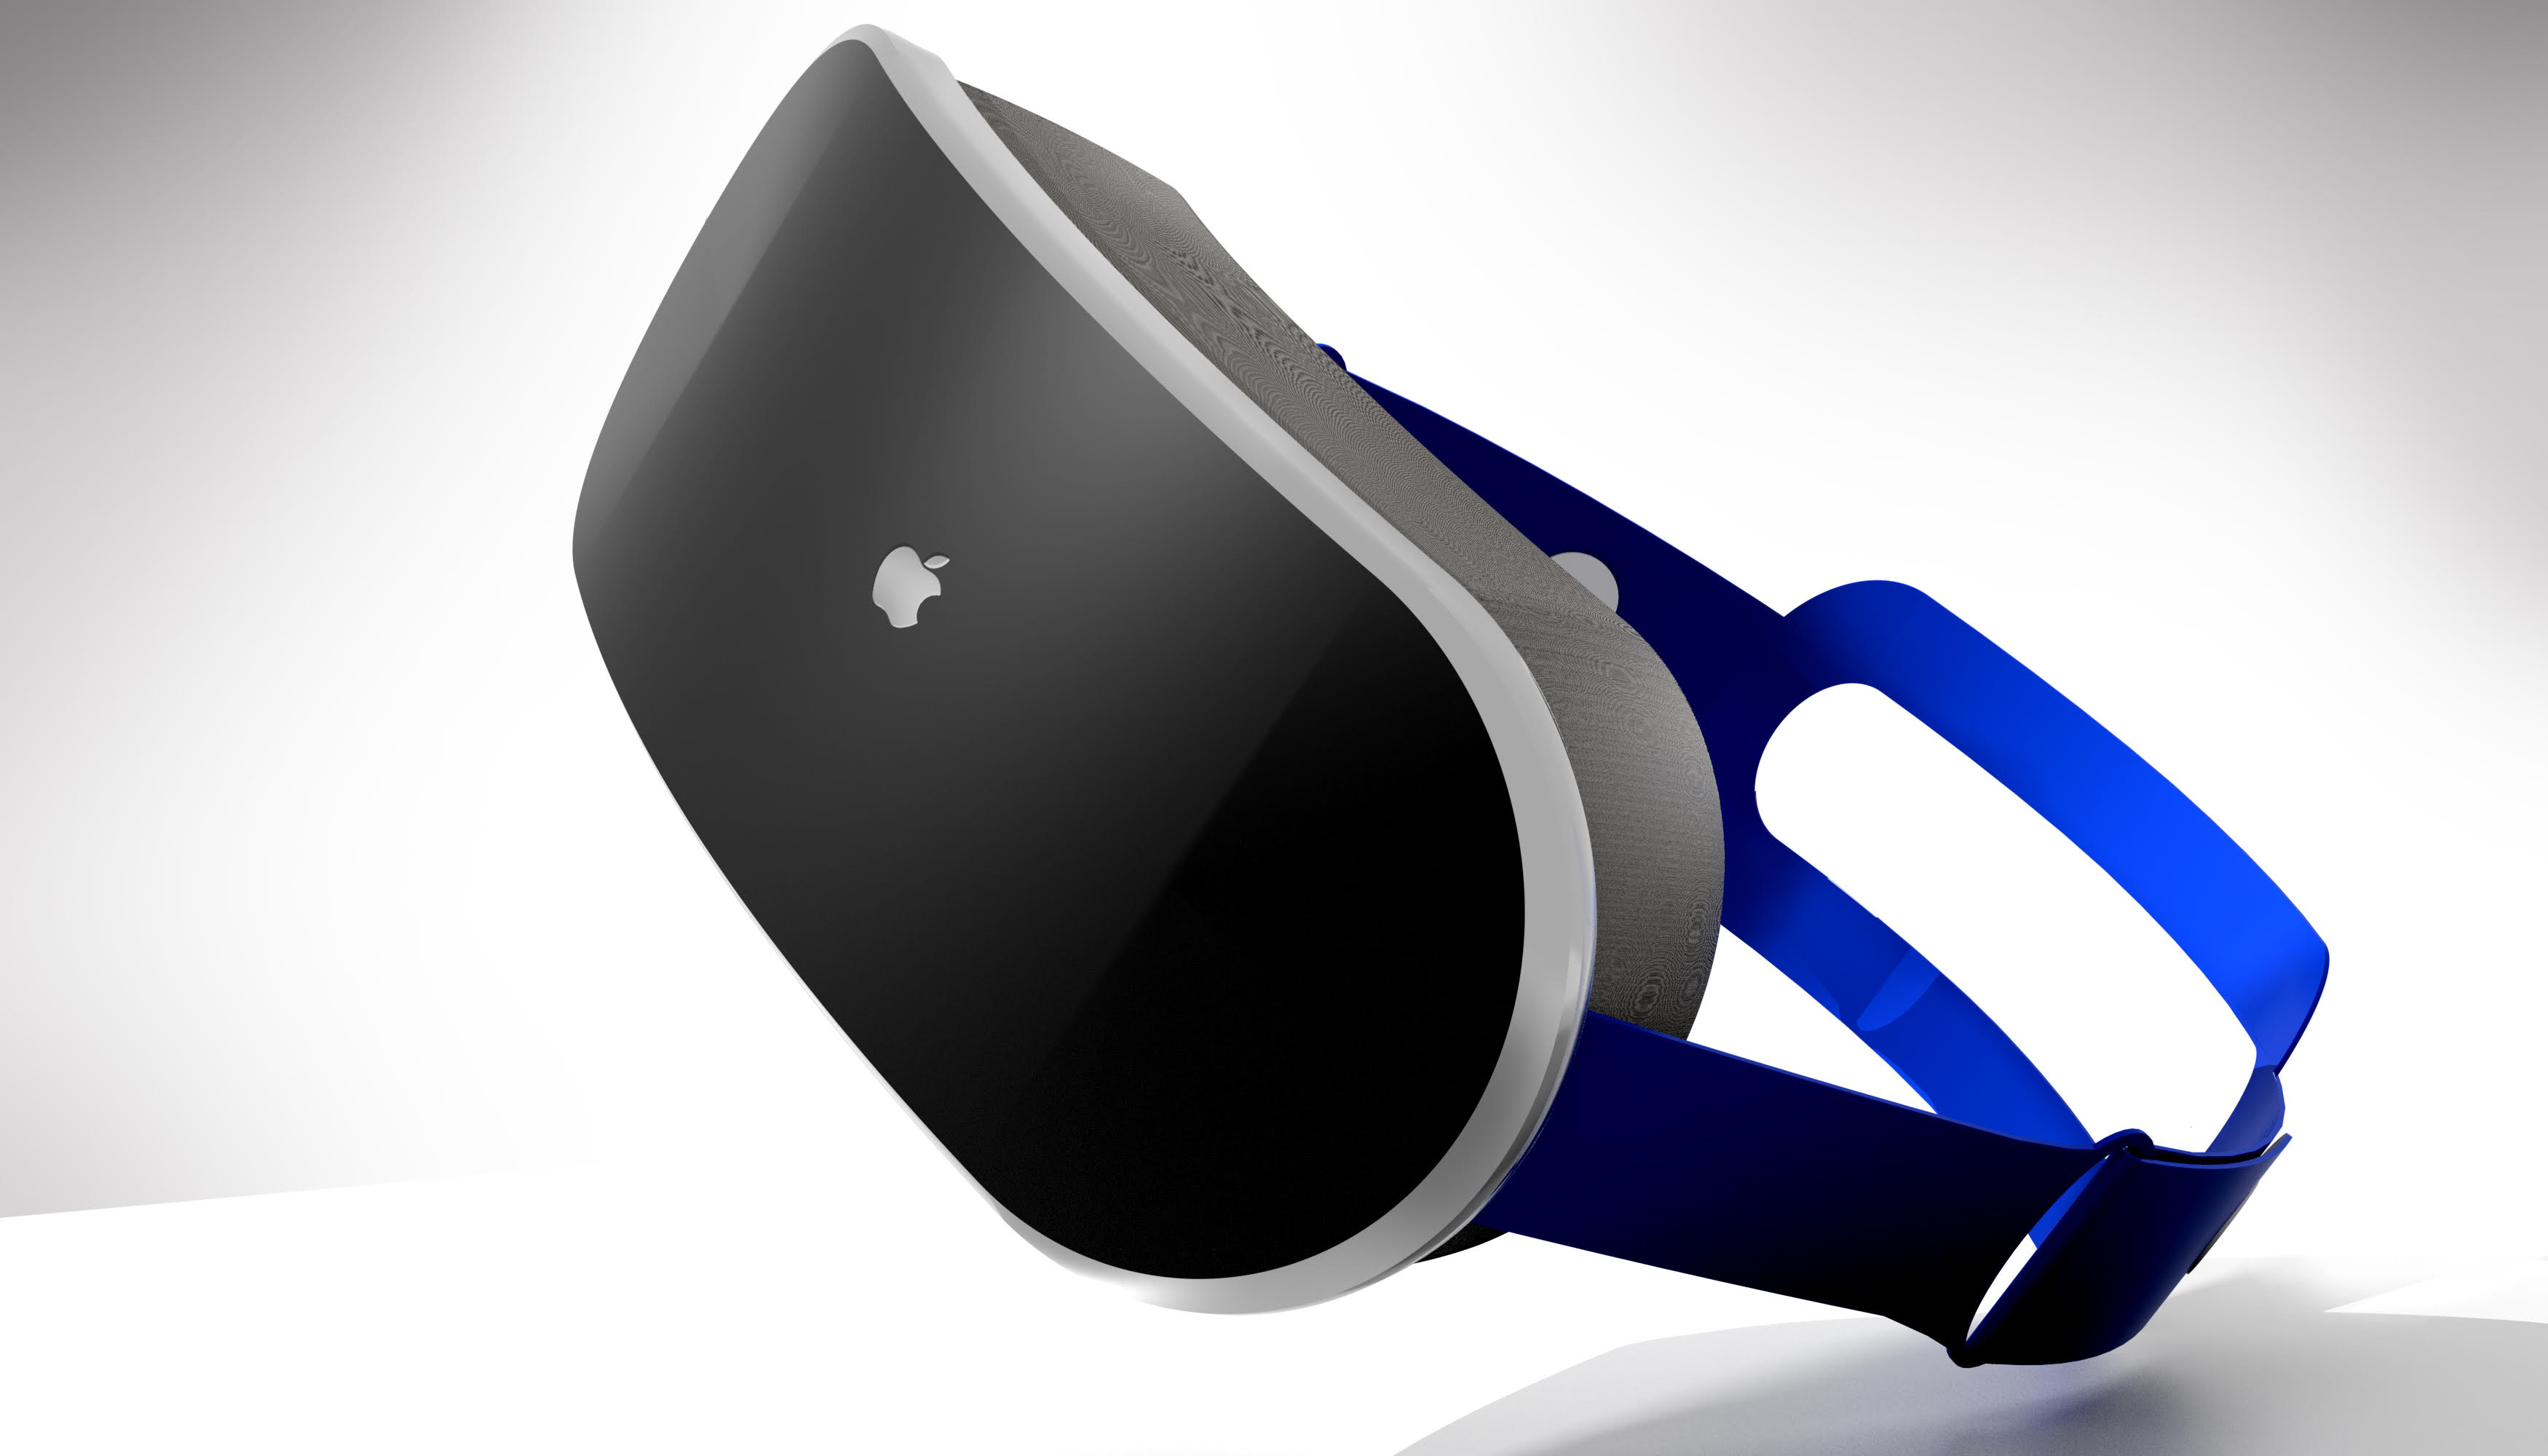 Render of what the Apple VR headset might look like